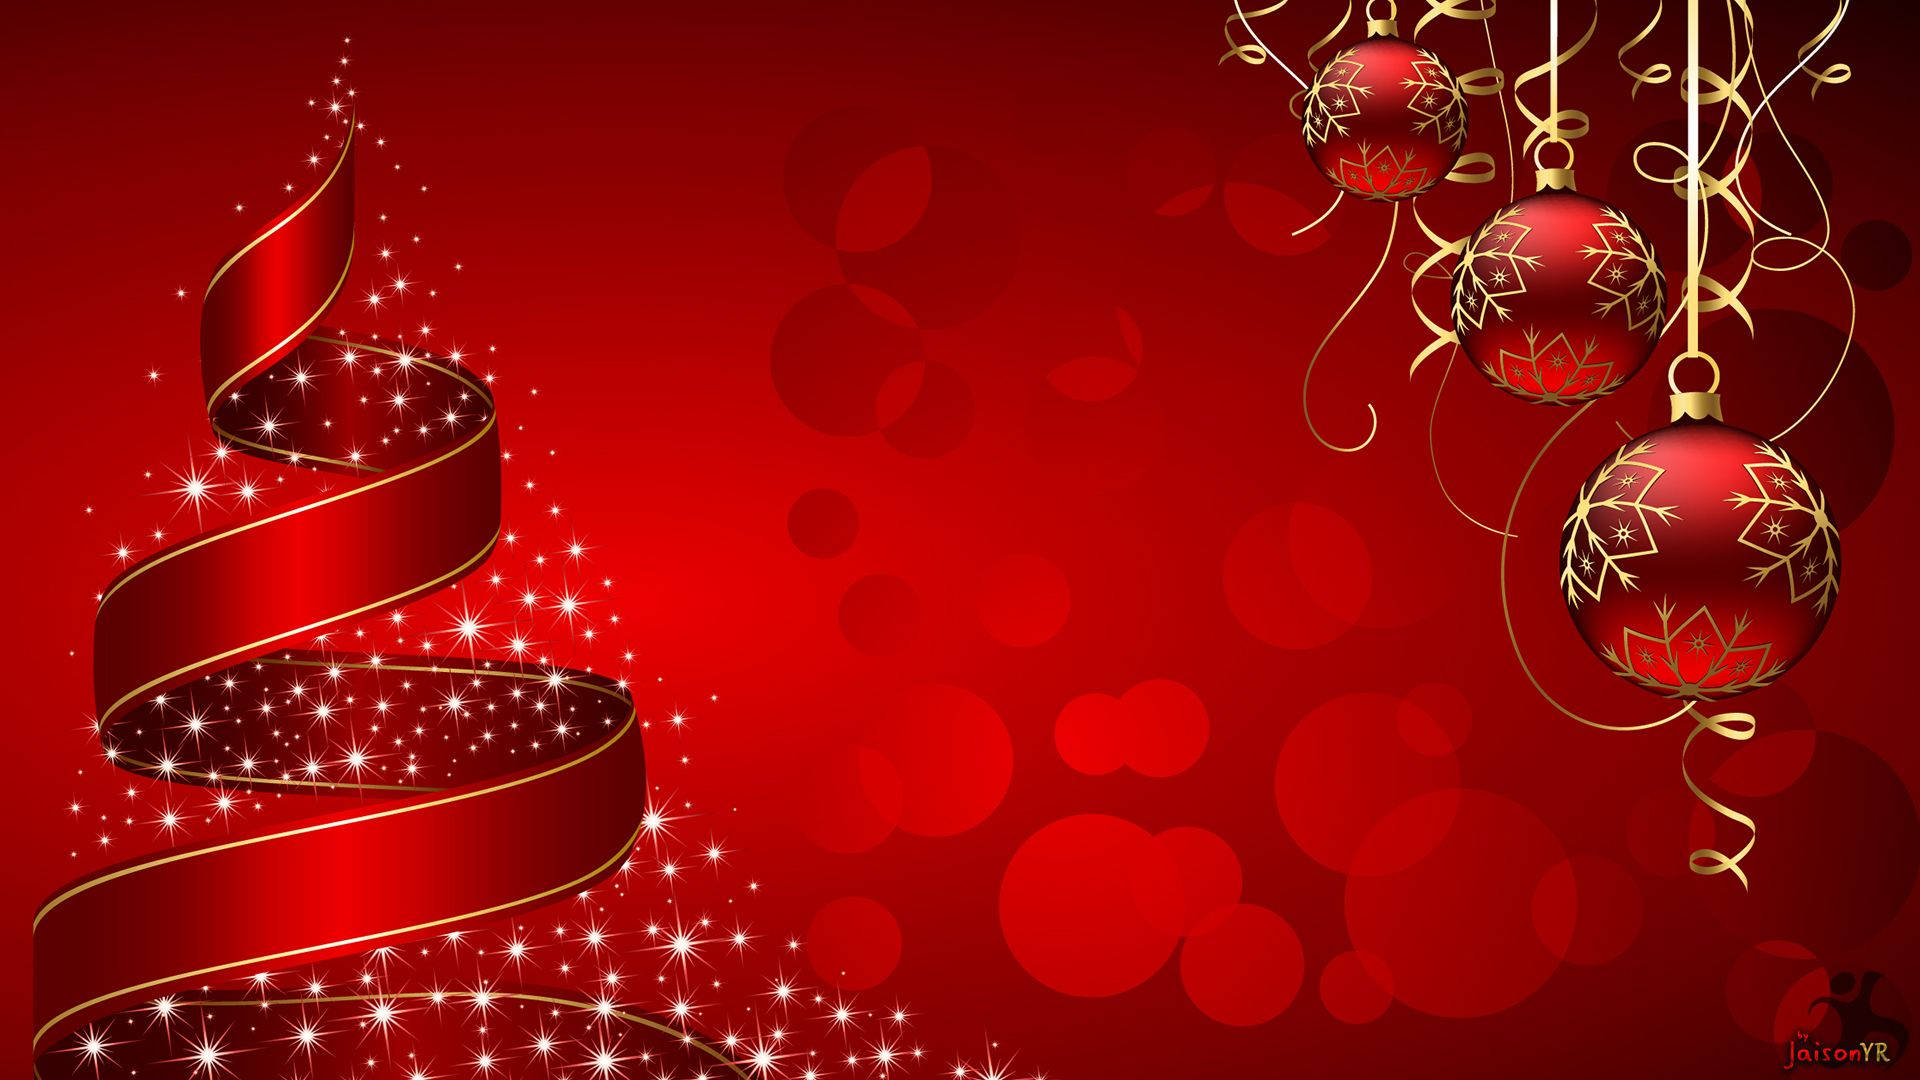 Red ribbon and balls in Christmas art wallpaper.